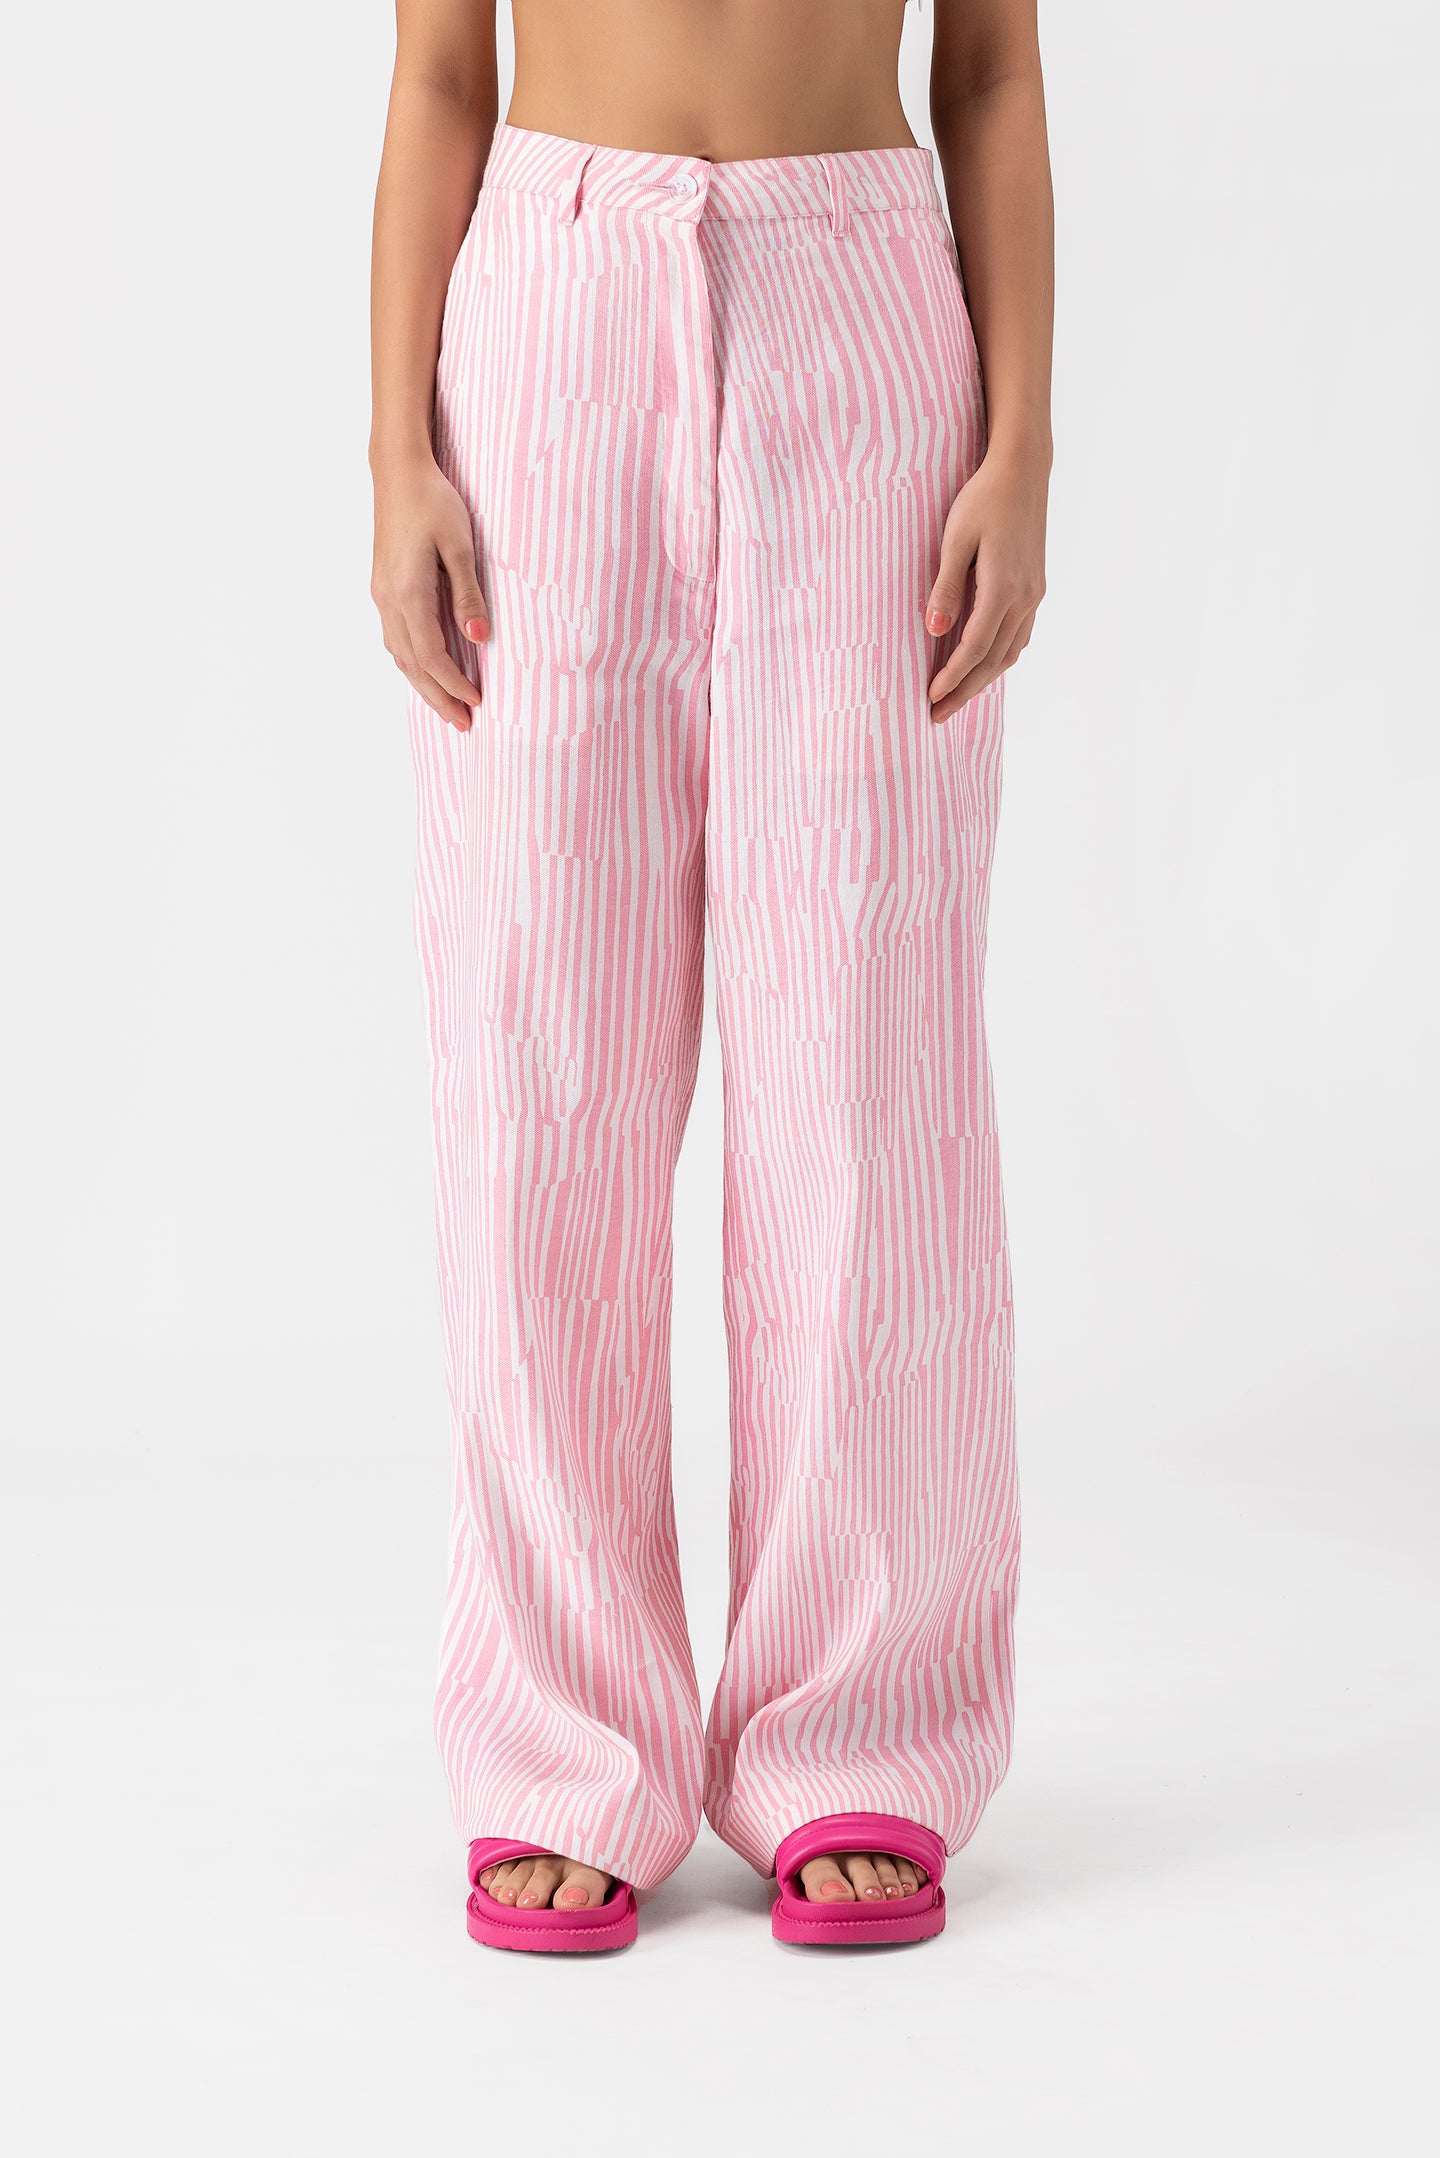 Printed Linen Womens Flared Trousers